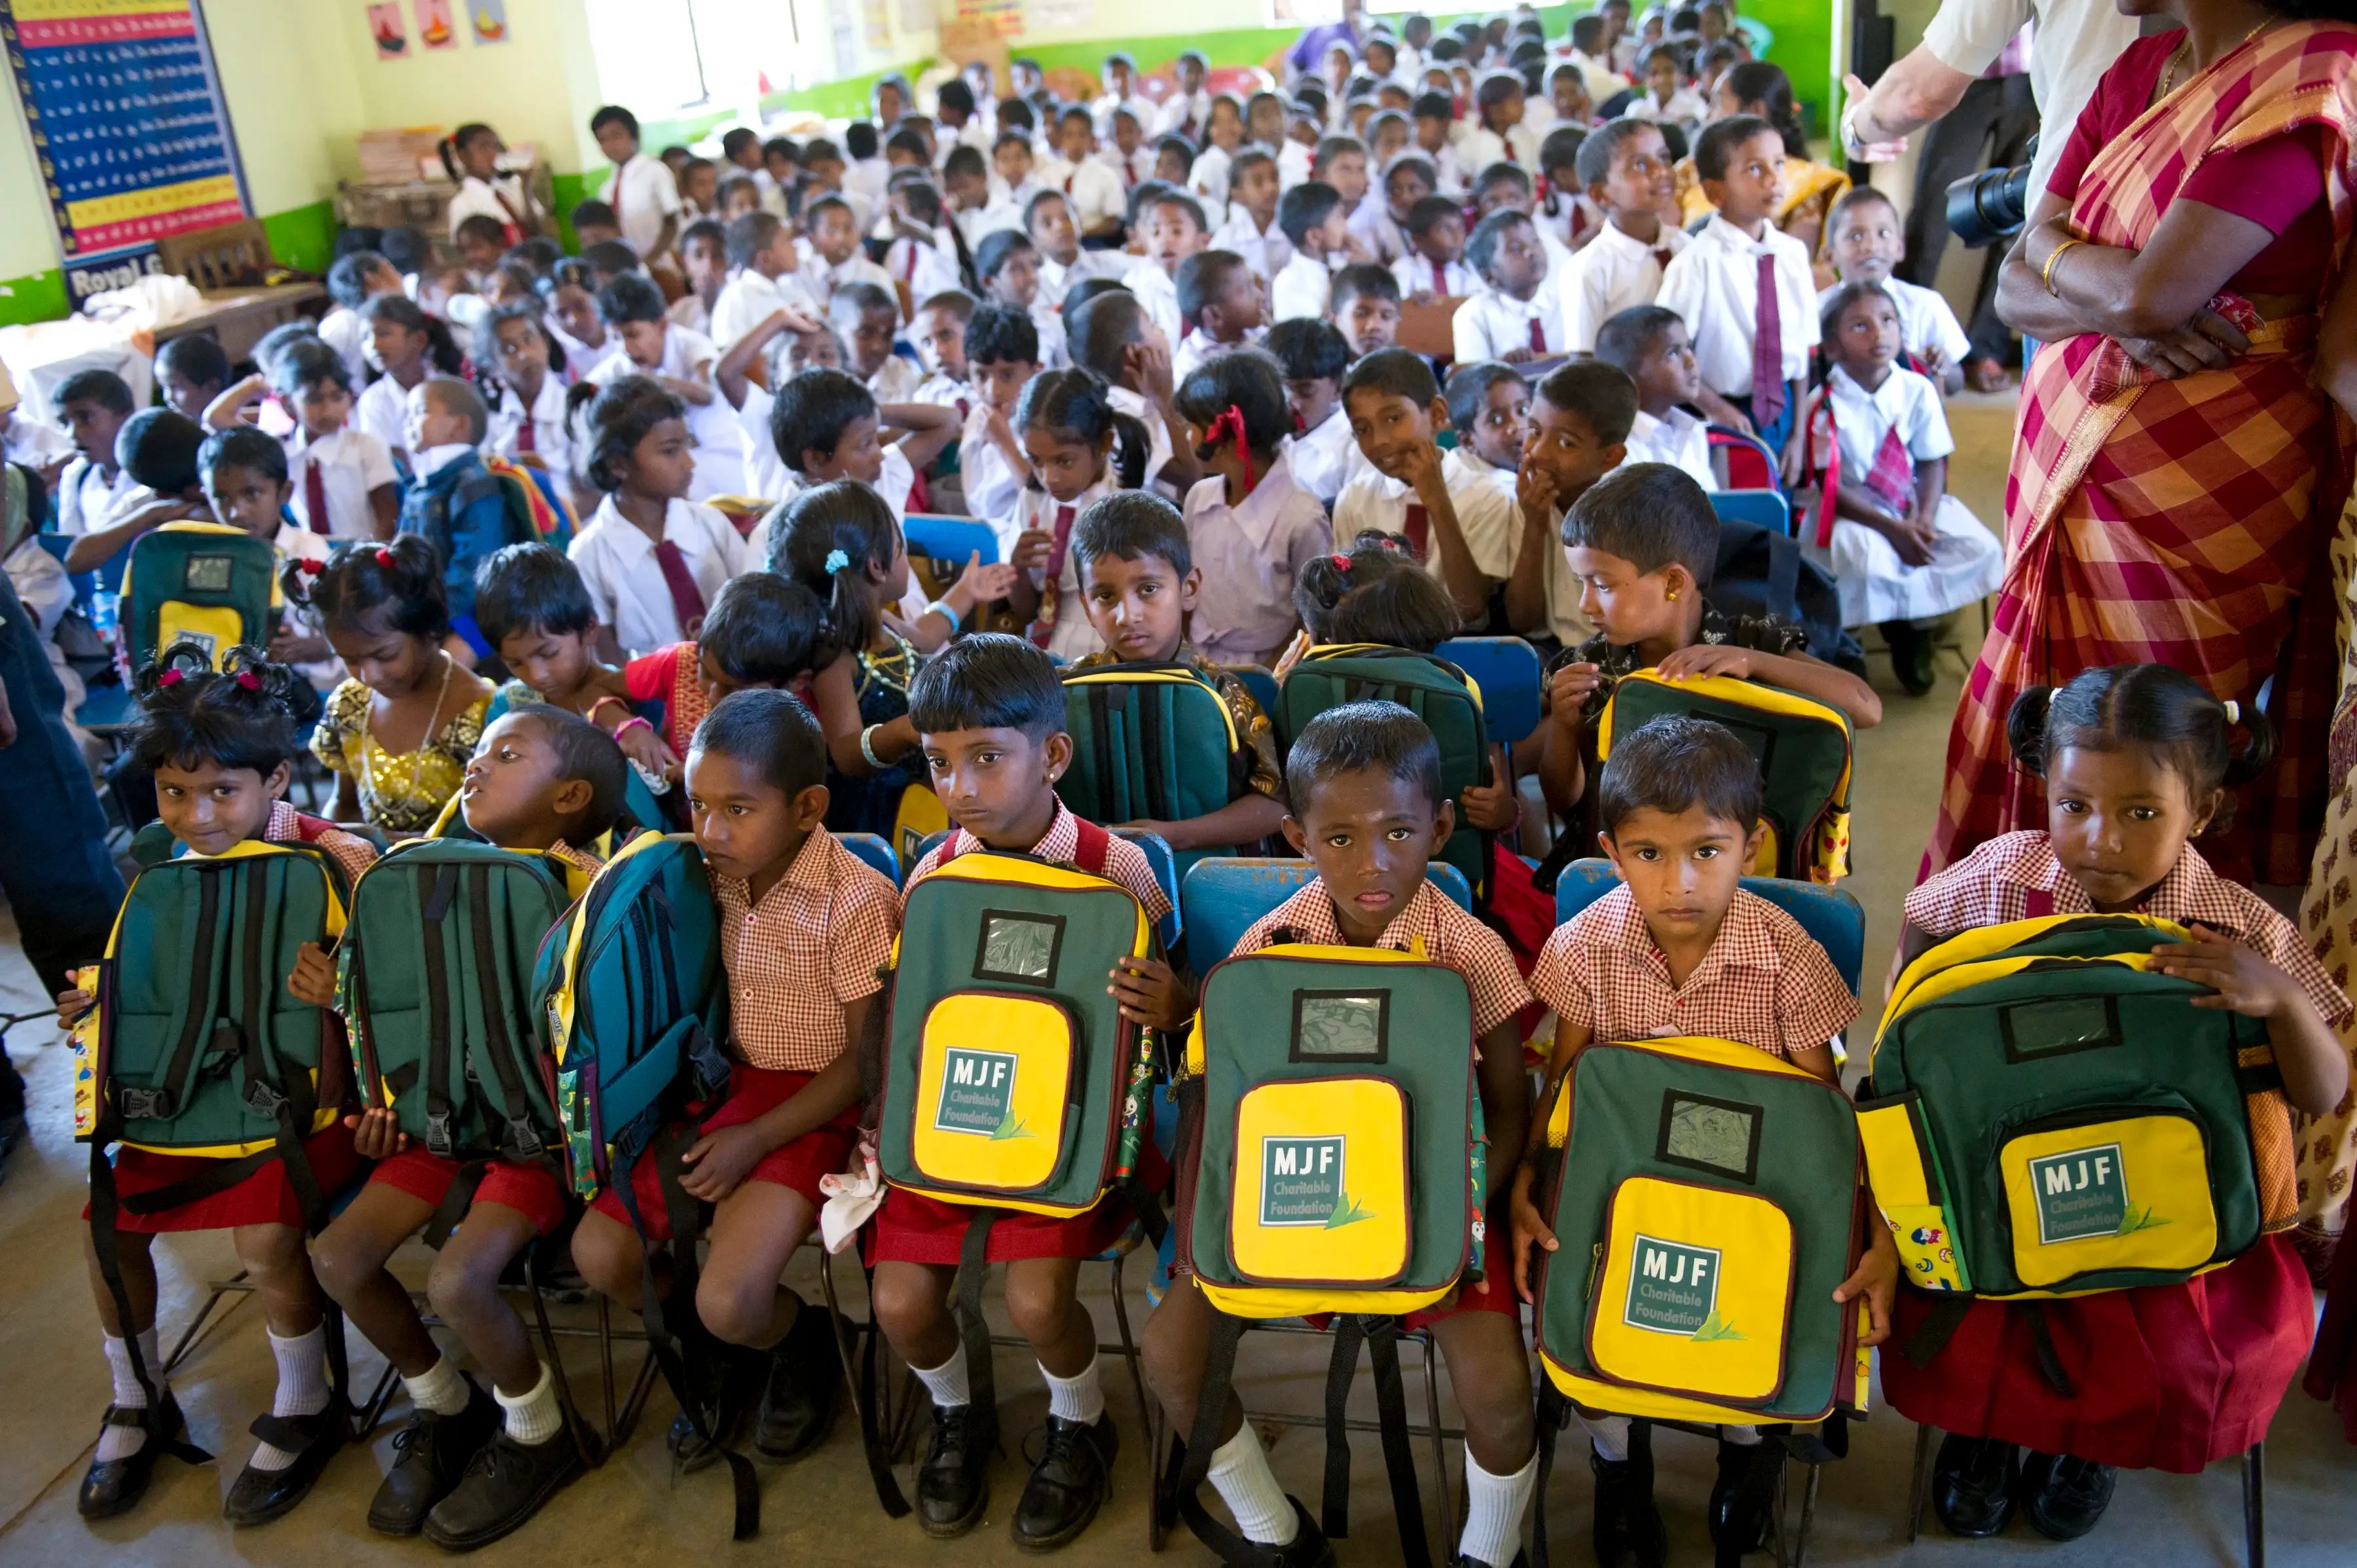 Children at MJF Child Development Centre receive a backpack for the new school year